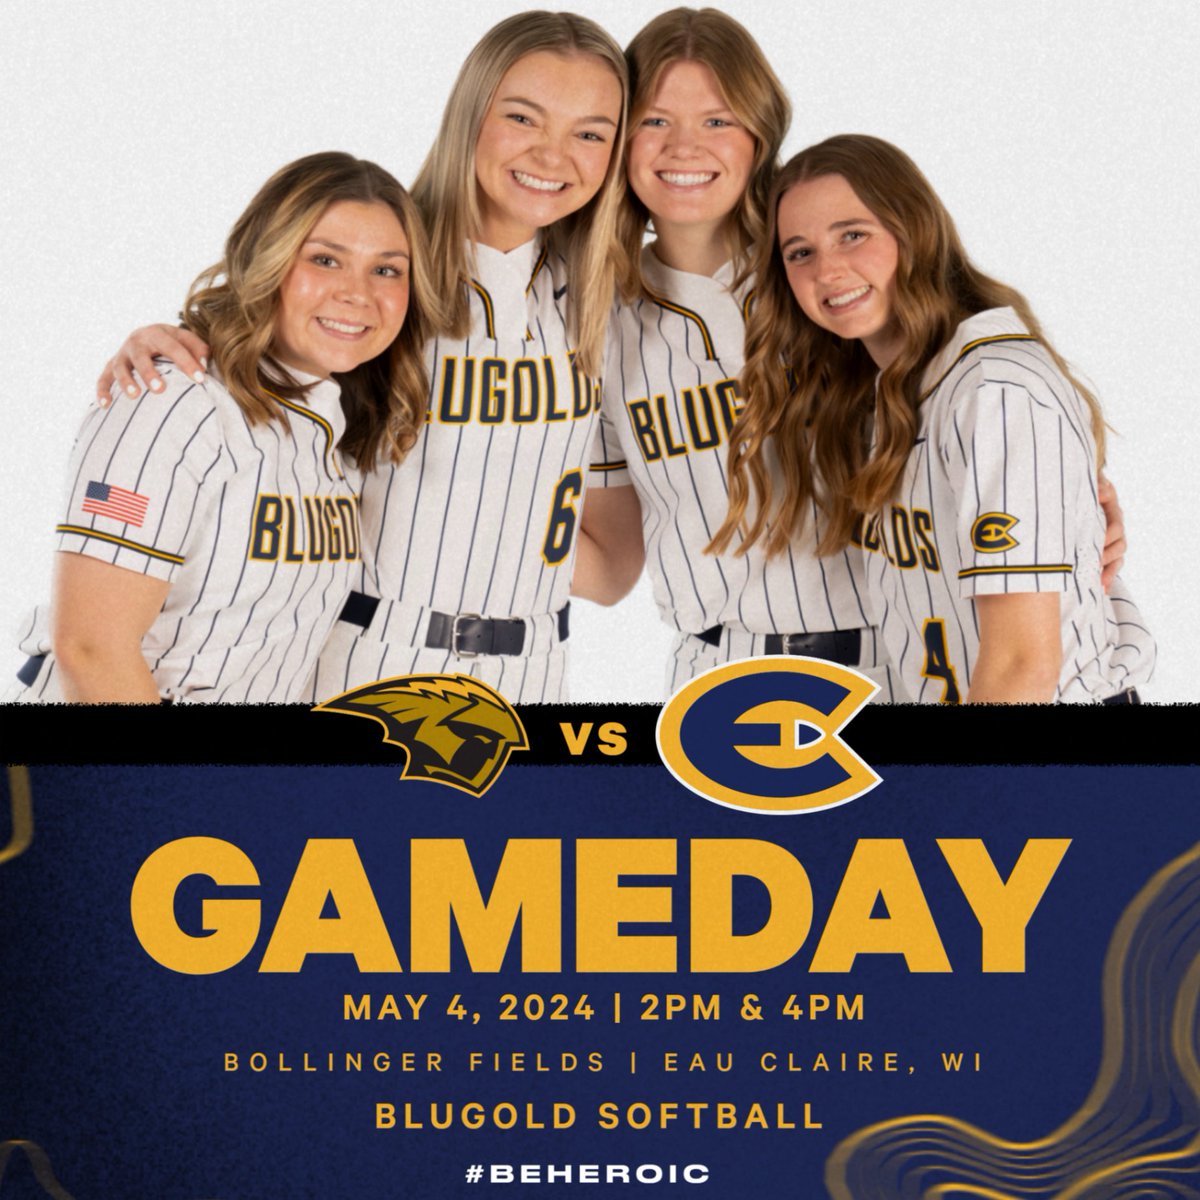 Wrappin' up the regular season at home! 🥎 We take on UW-Oshkosh for the final home games of 2024 and we're celebrating Alumnae Day! Come on down to Bollinger Fields or follow along at blugolds.com! #BeHeroic